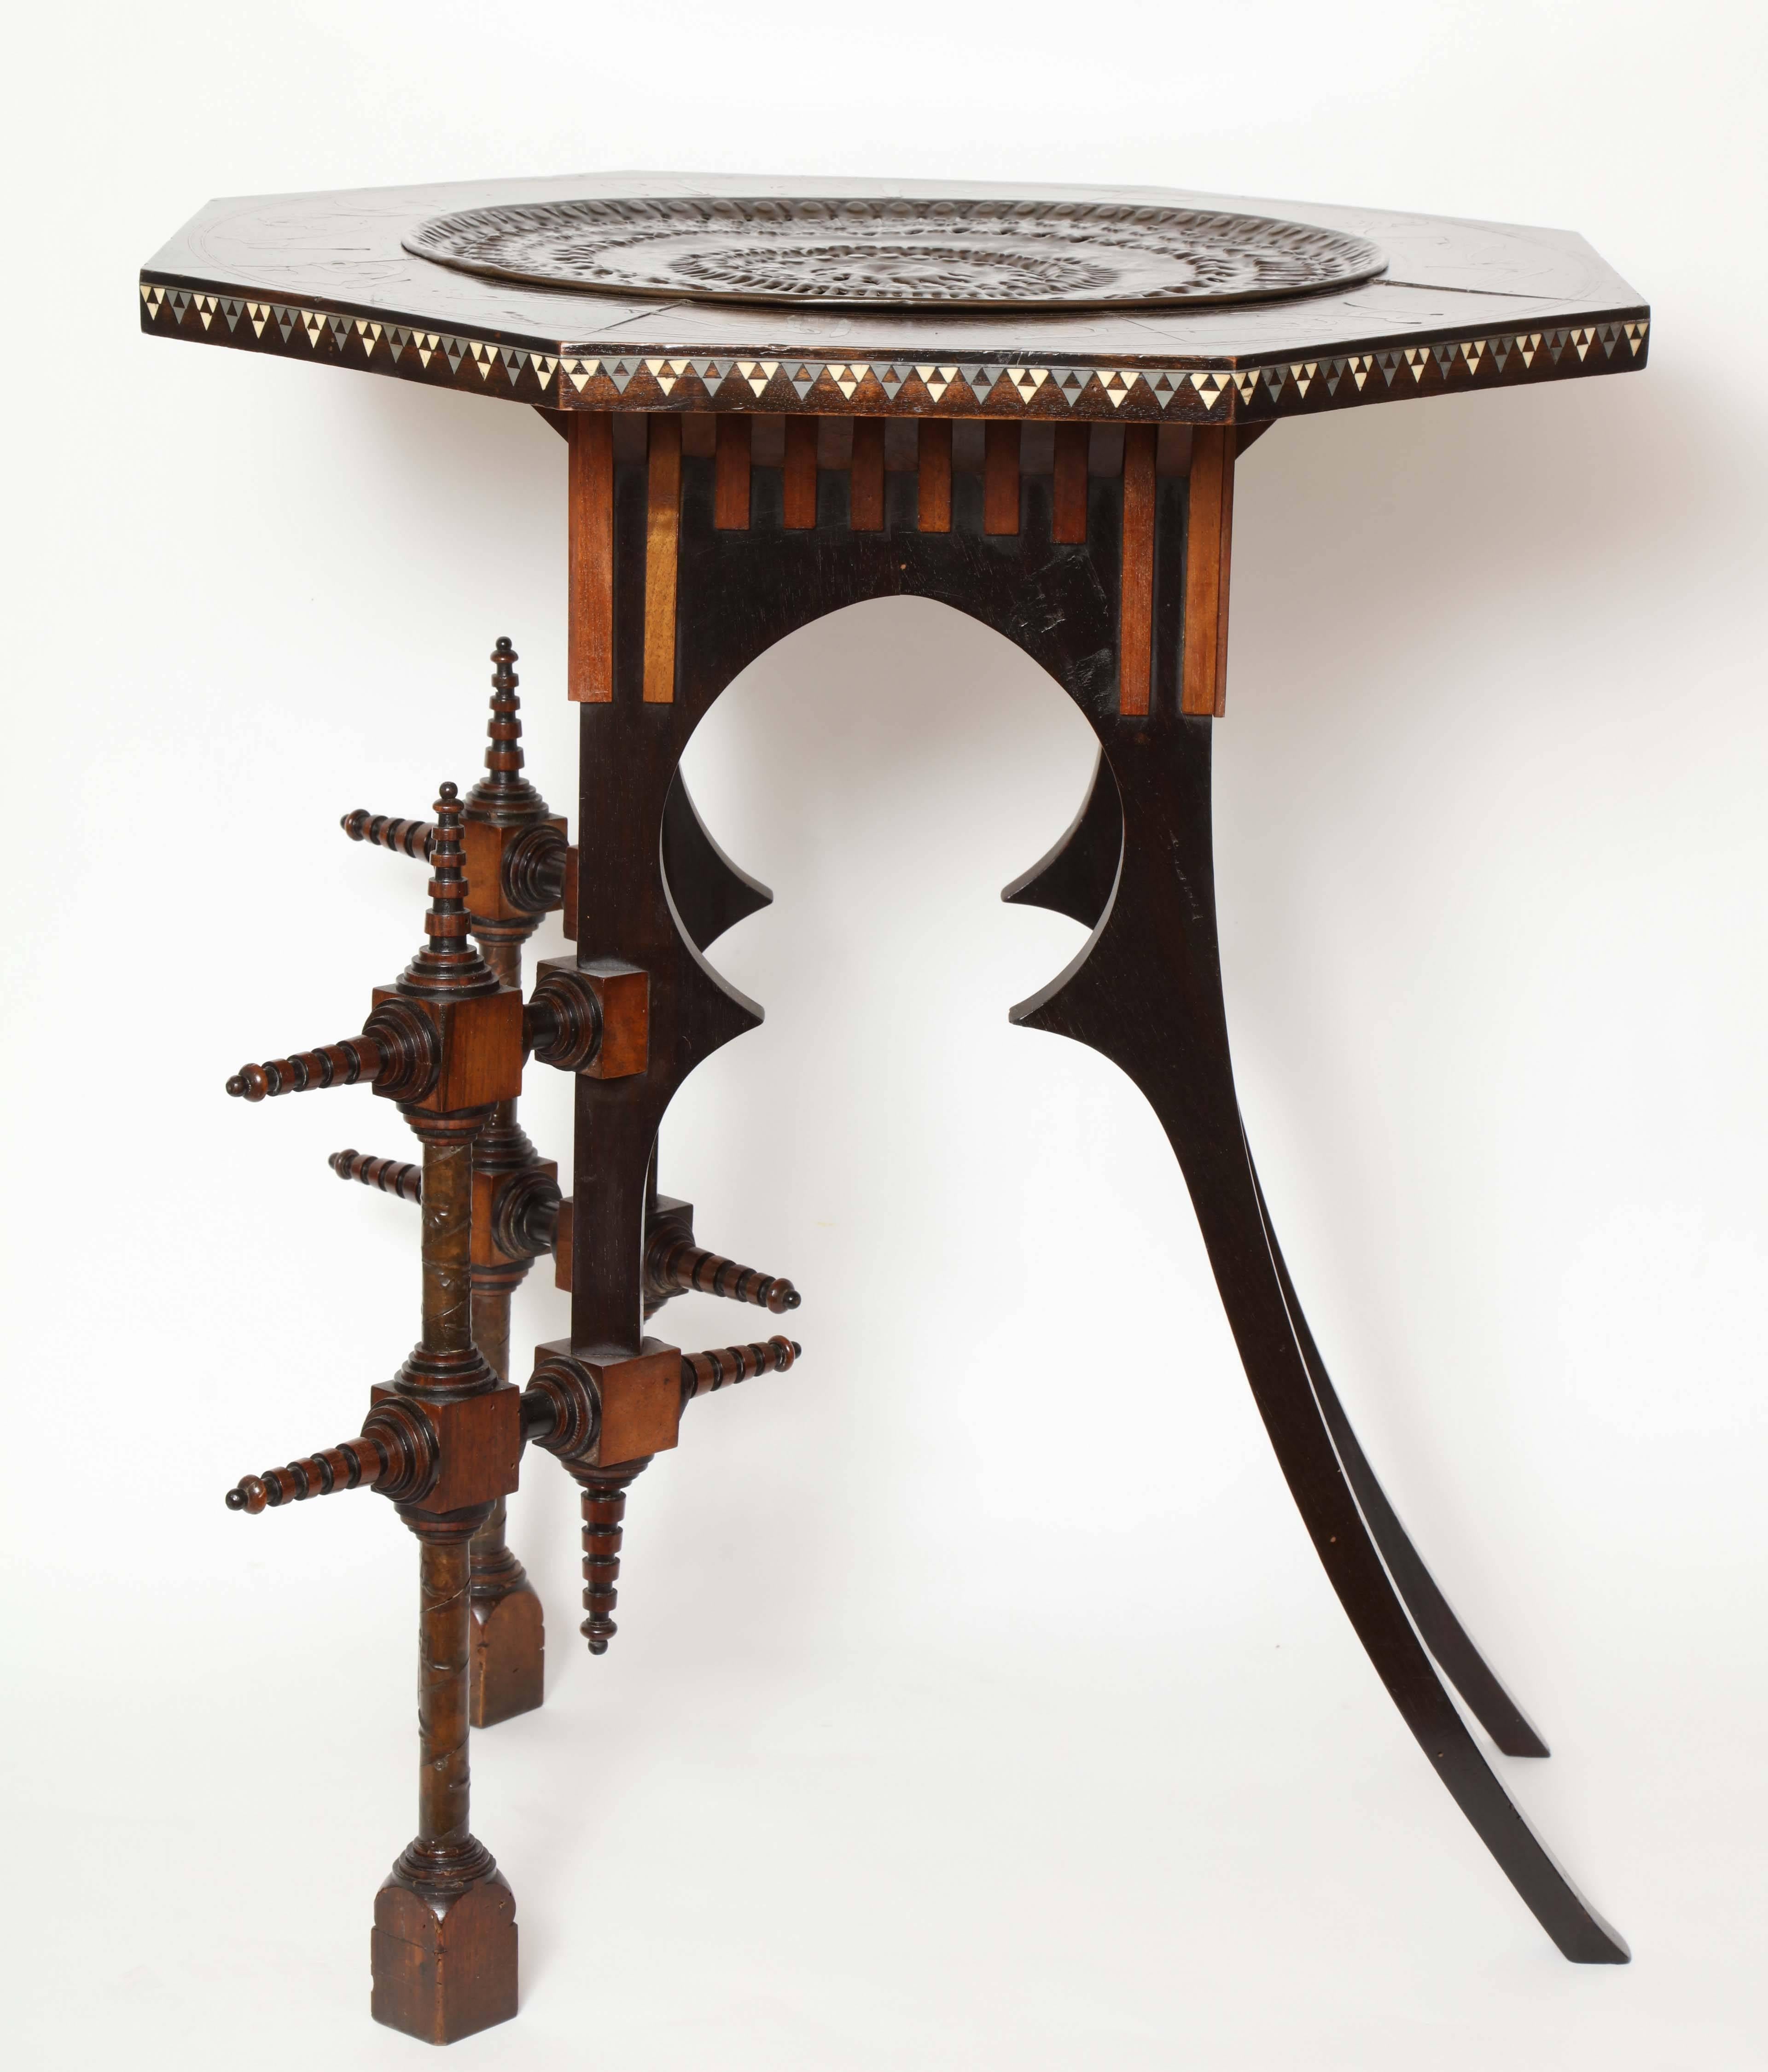 Carved Carl Bugatti Octagonal Occasional Table, 1898 For Sale